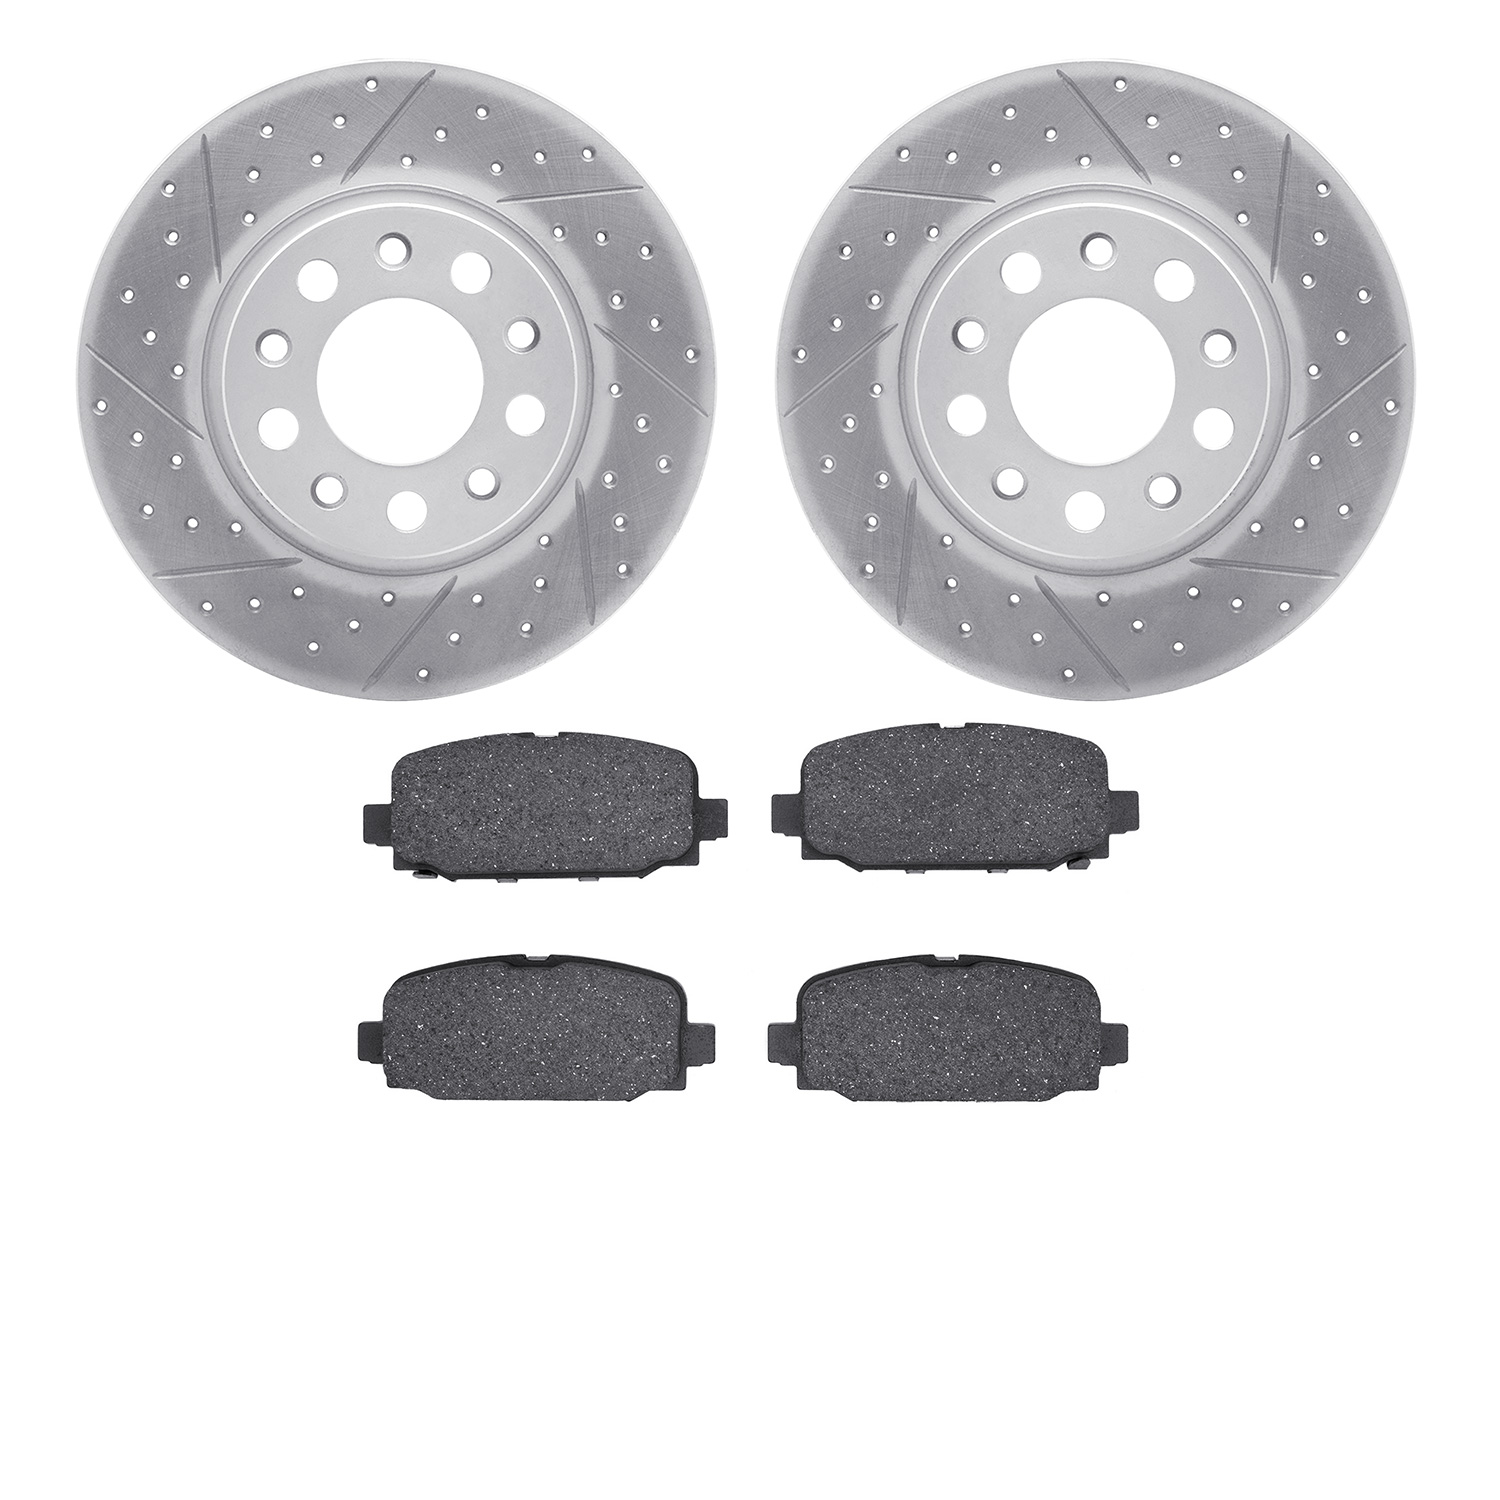 2502-42052 Geoperformance Drilled/Slotted Rotors w/5000 Advanced Brake Pads Kit, Fits Select Mopar, Position: Rear